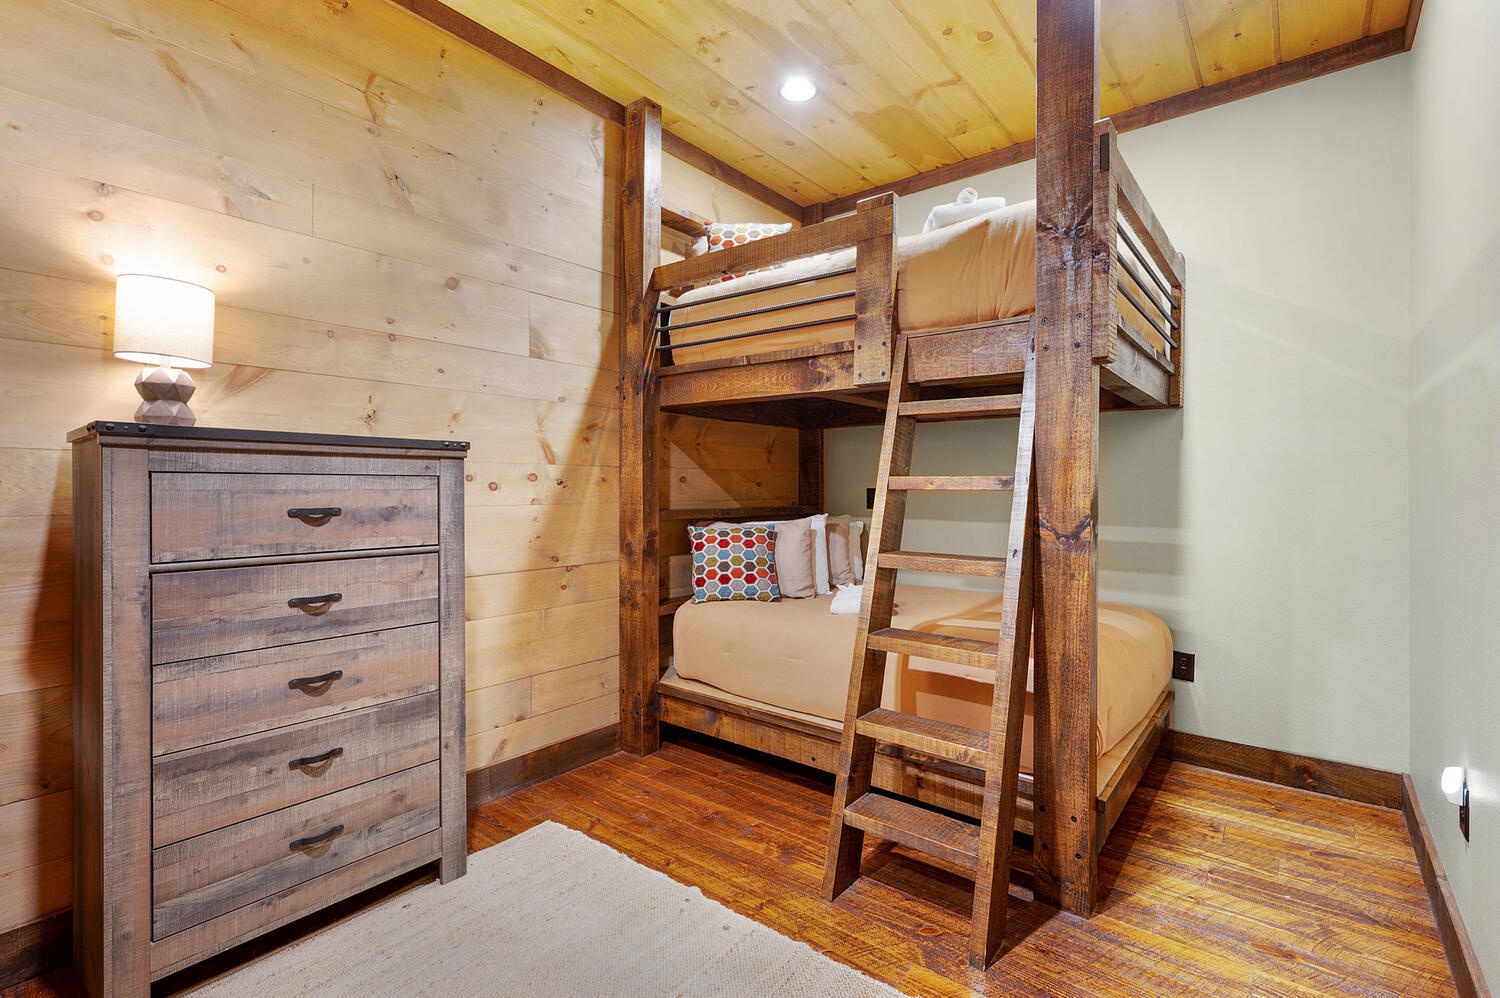 All Decked Out- Lower level bunk room